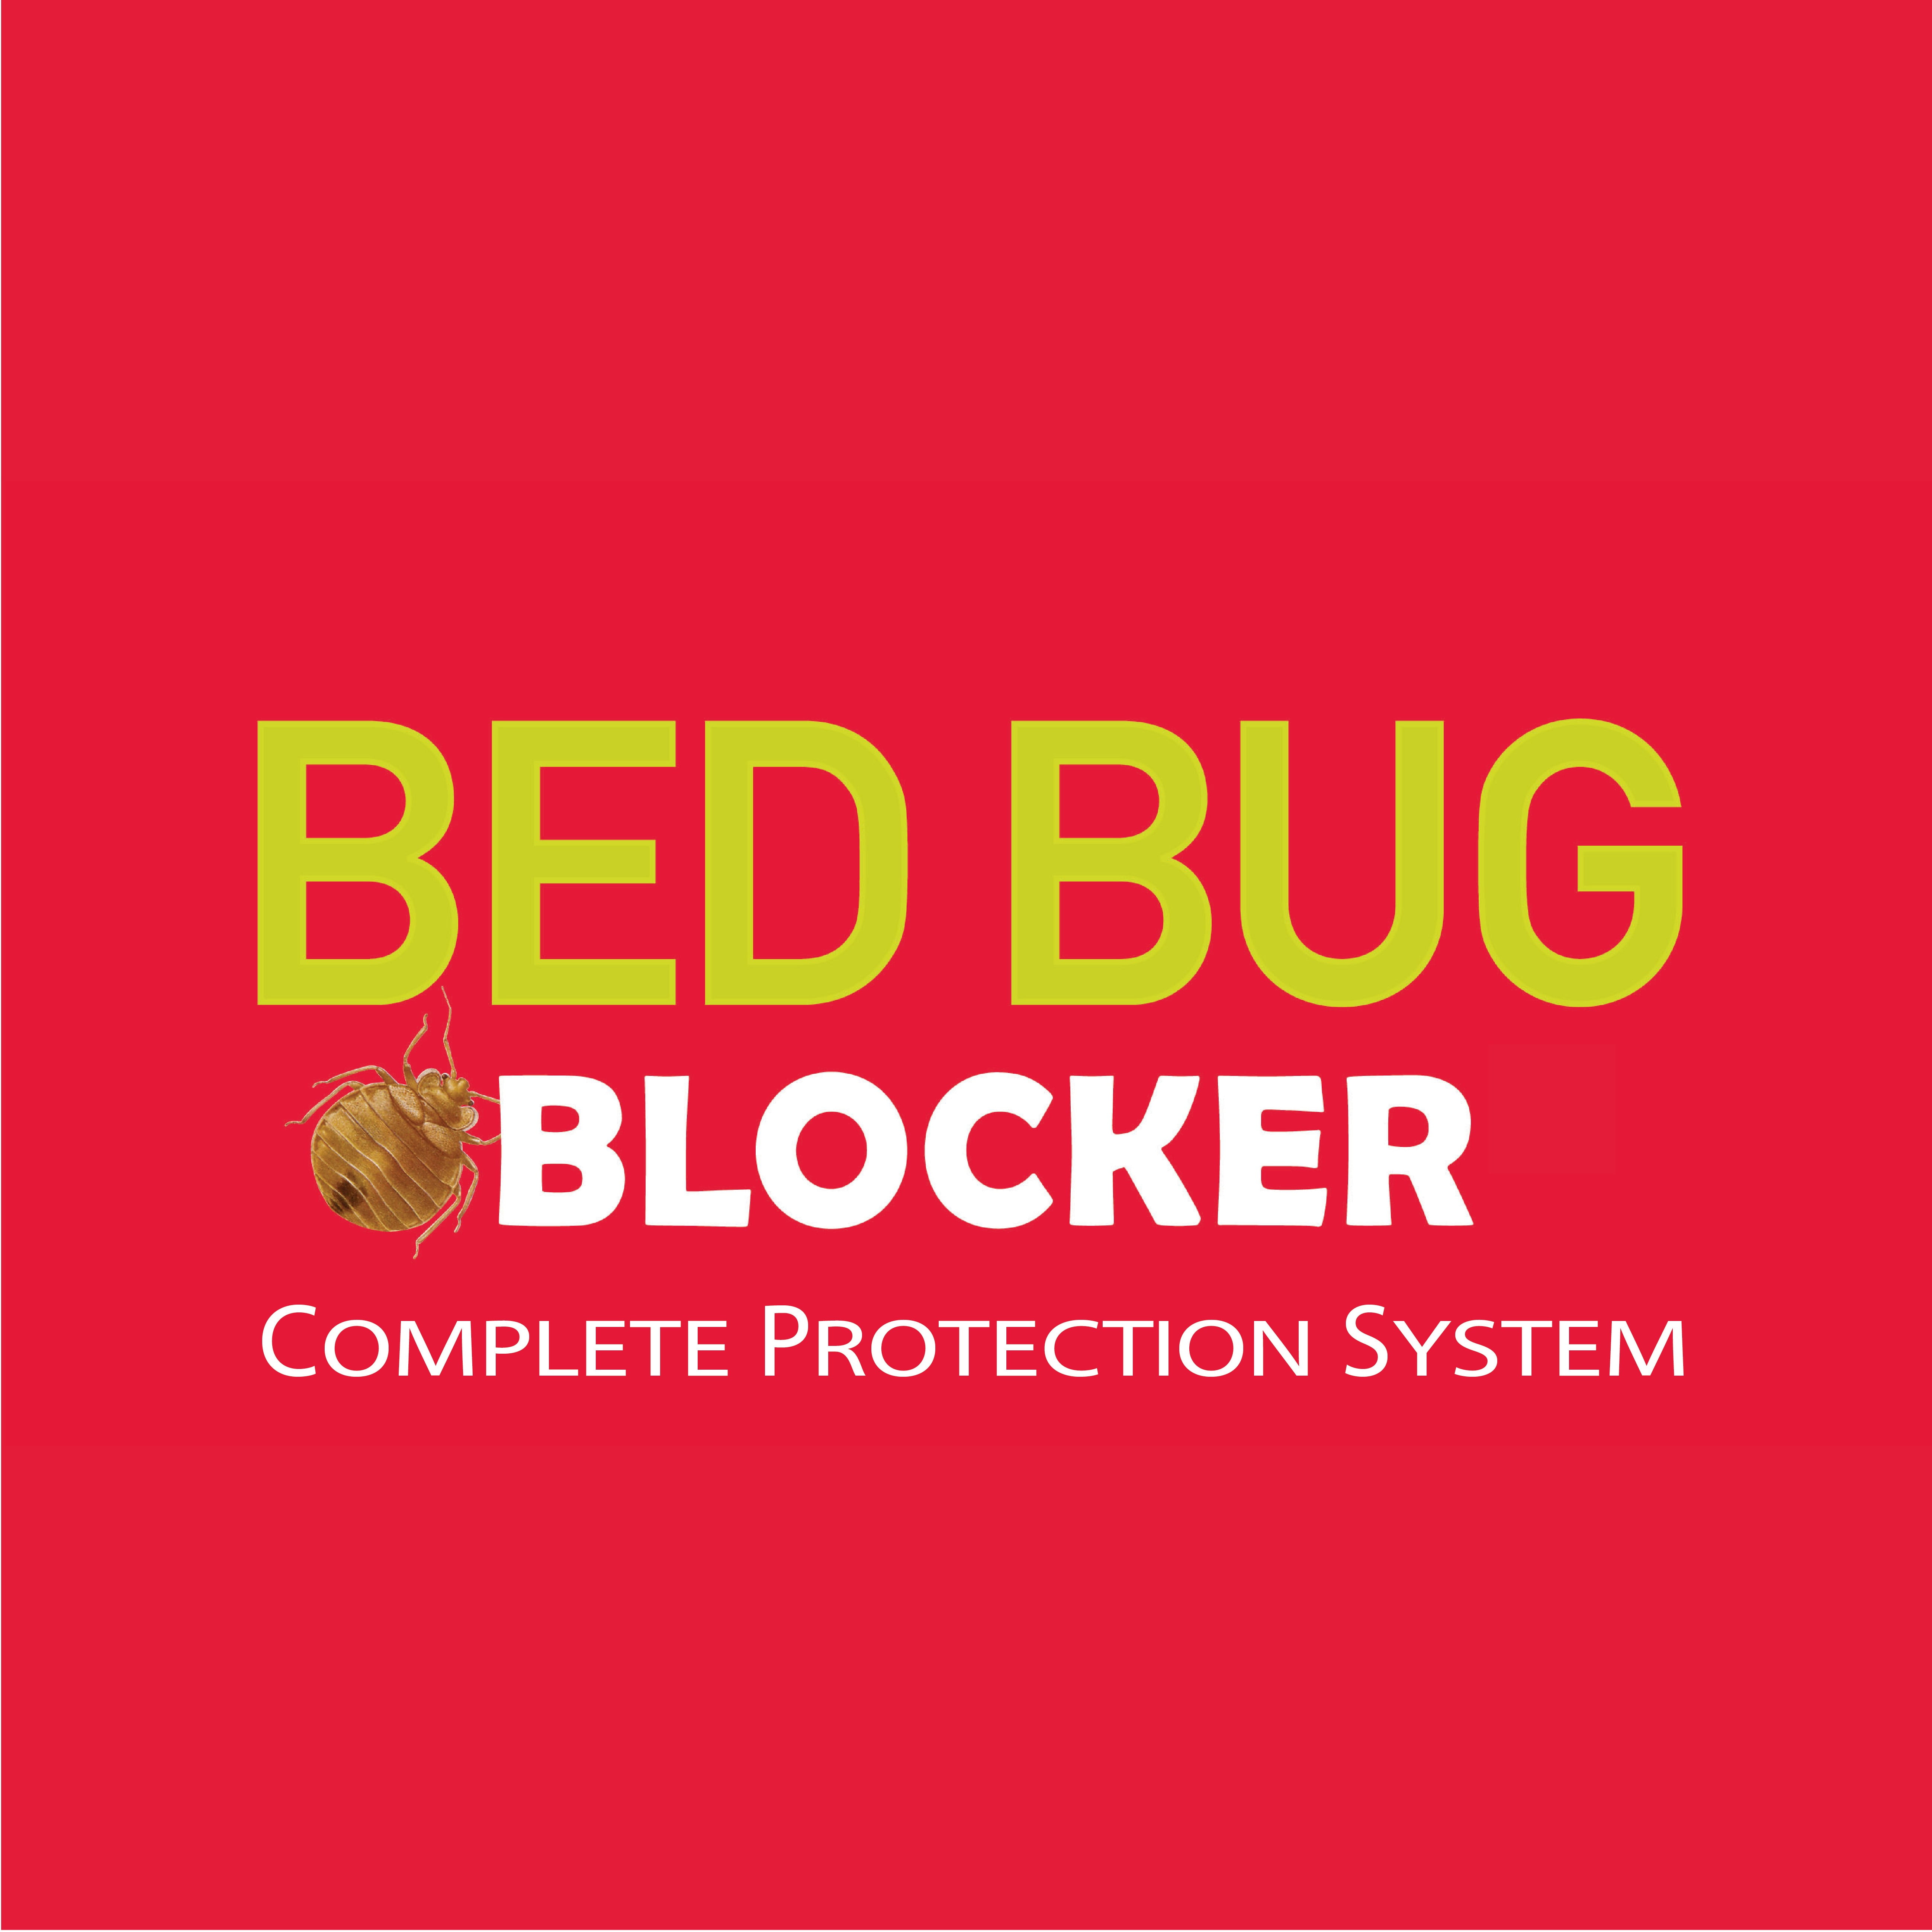 All-in-One Bed Bug Blocker Waterproof Zippered Mattress Protector, King